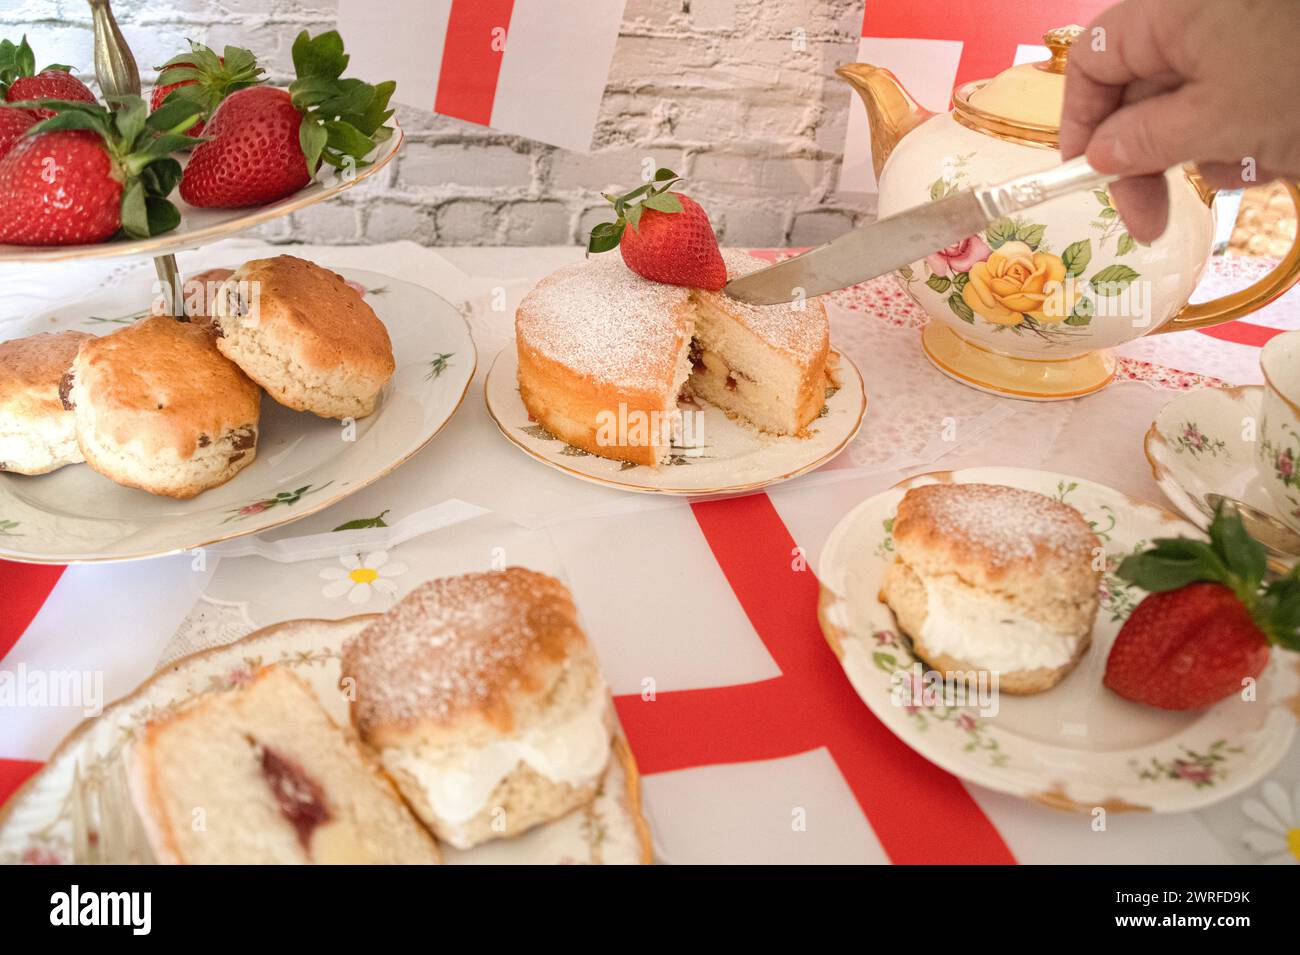 St Georges day  afternoon tea celebrations  English flag  strawberries and  cream  scones  english tea  vintage tea party Stock Photo